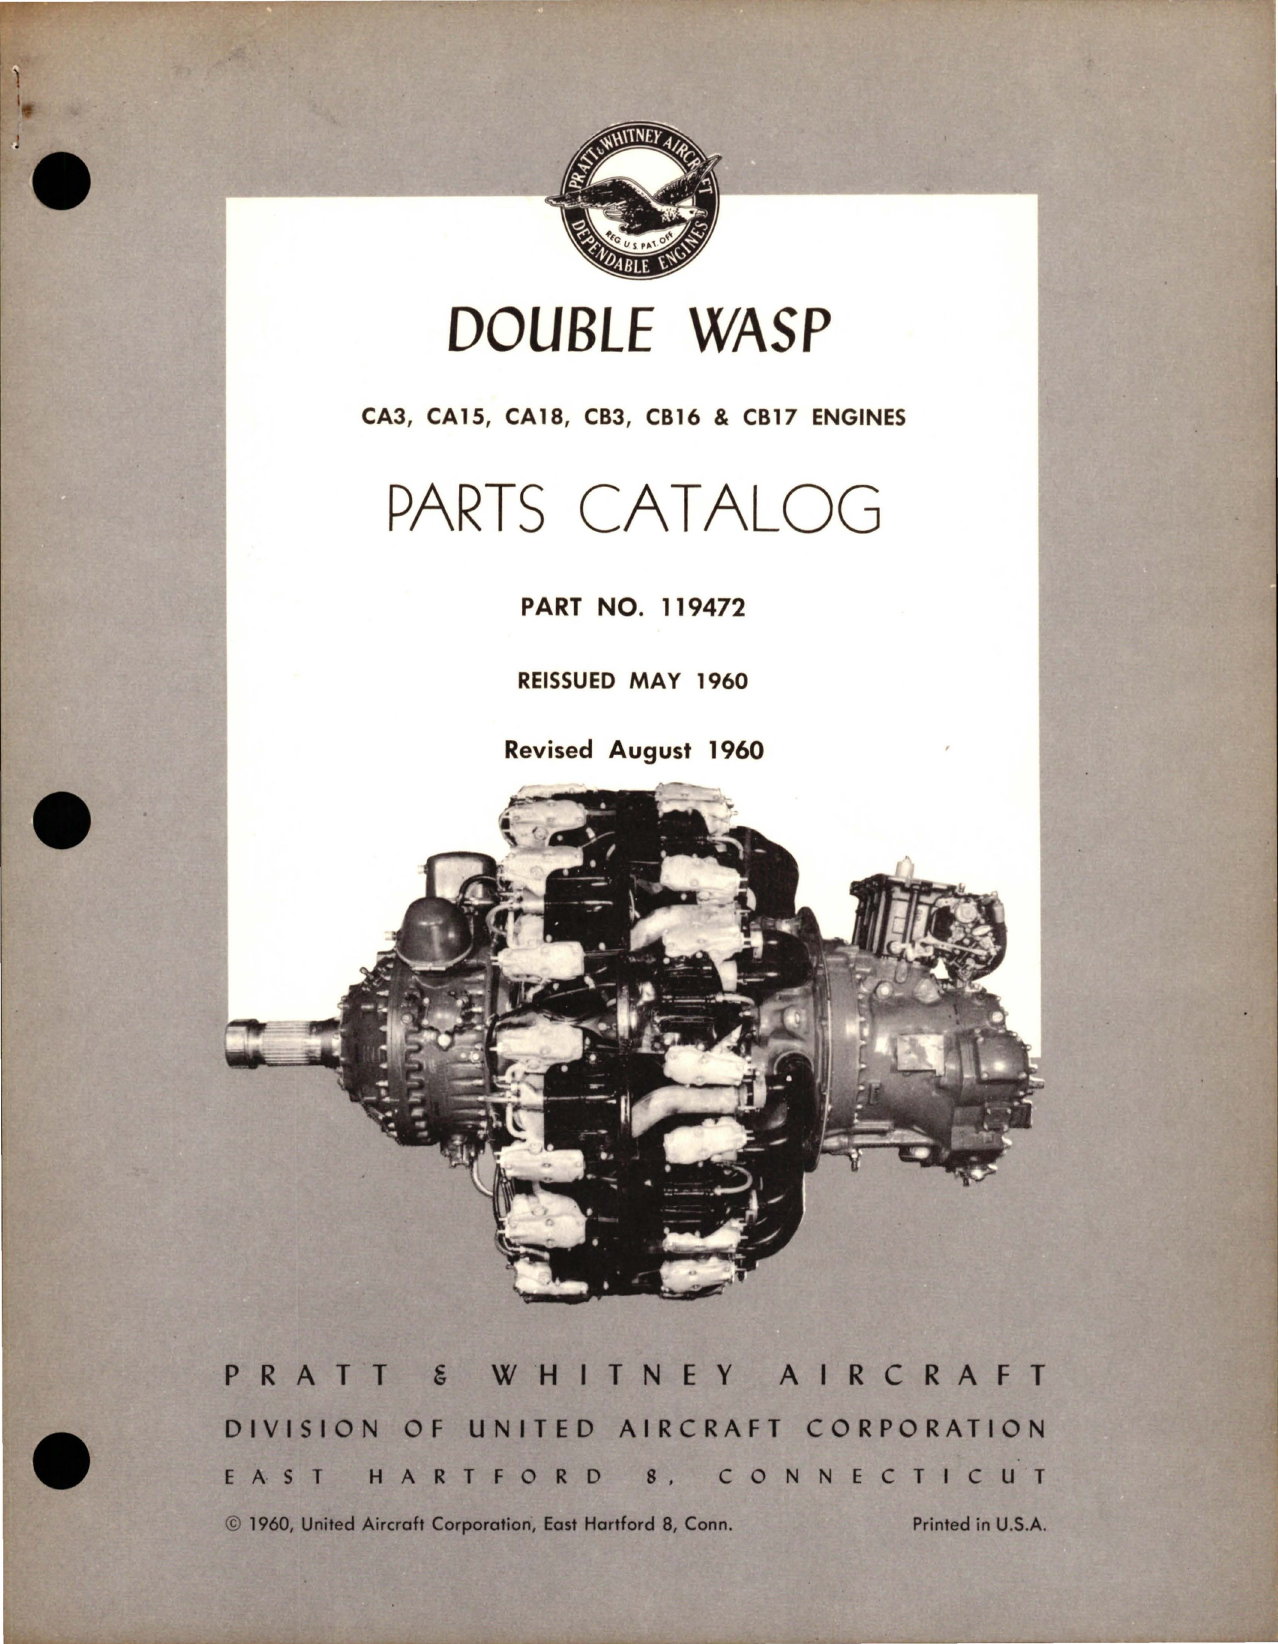 Sample page 1 from AirCorps Library document: Parts Catalog Revision for Double Wasp - CA3, CA15, CA18, CB3, CB16 & CB17 Engines - Part 119472